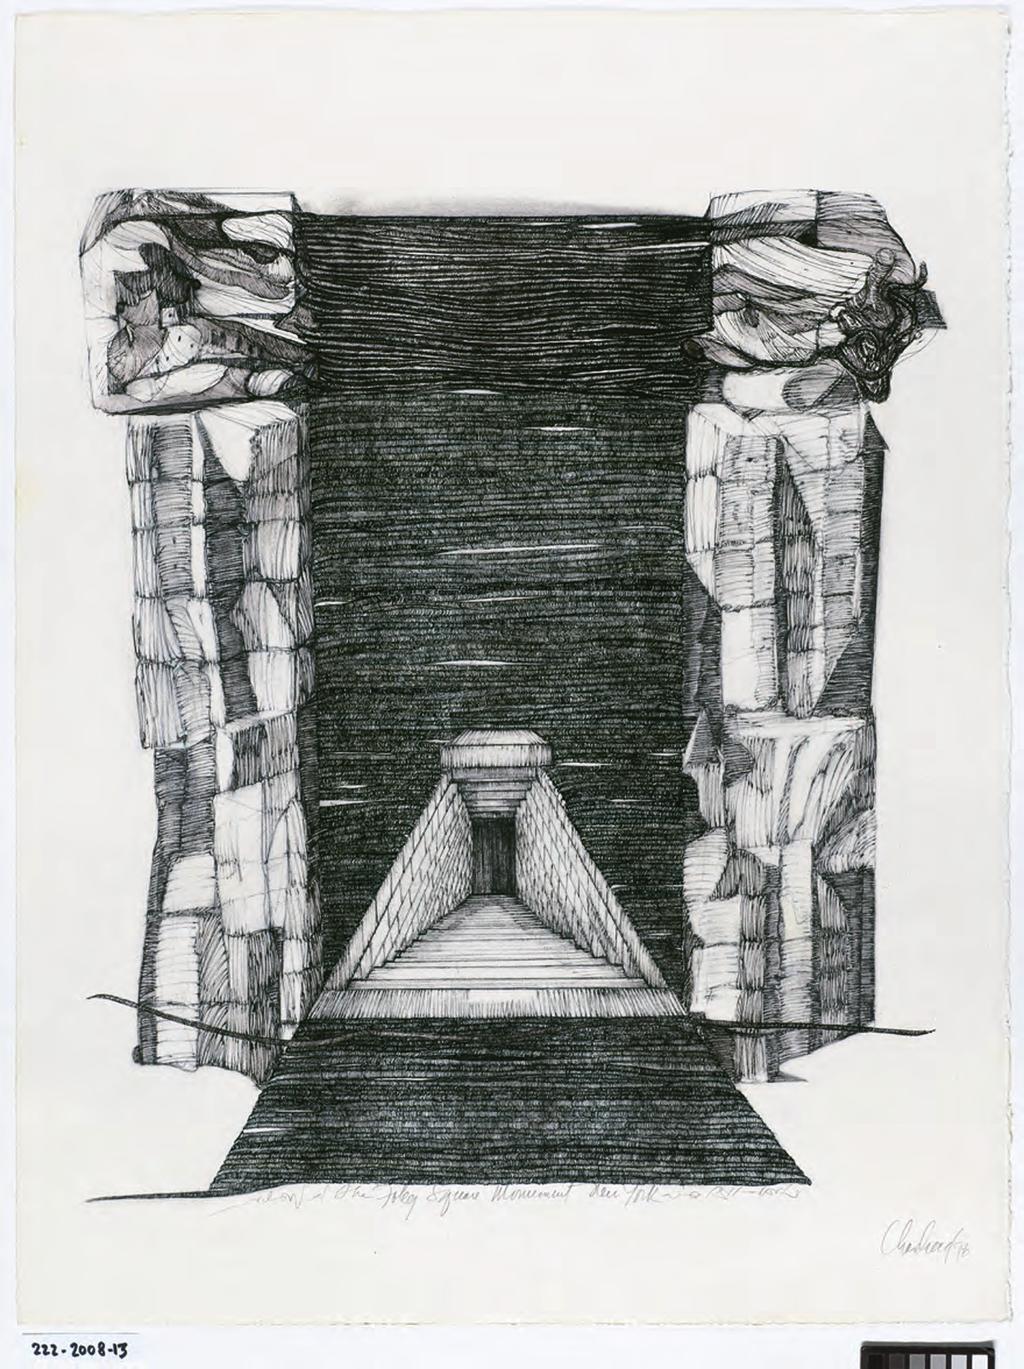 Far left, Monument to Oscar Wilde, 2011, etching on paper with charcoal, charcoal pencil, pen and ink, 30⅞ by 23¾ Left, Zola s Monument, Paris, 1997, etching on paper with charcoal, charcoal pencil,